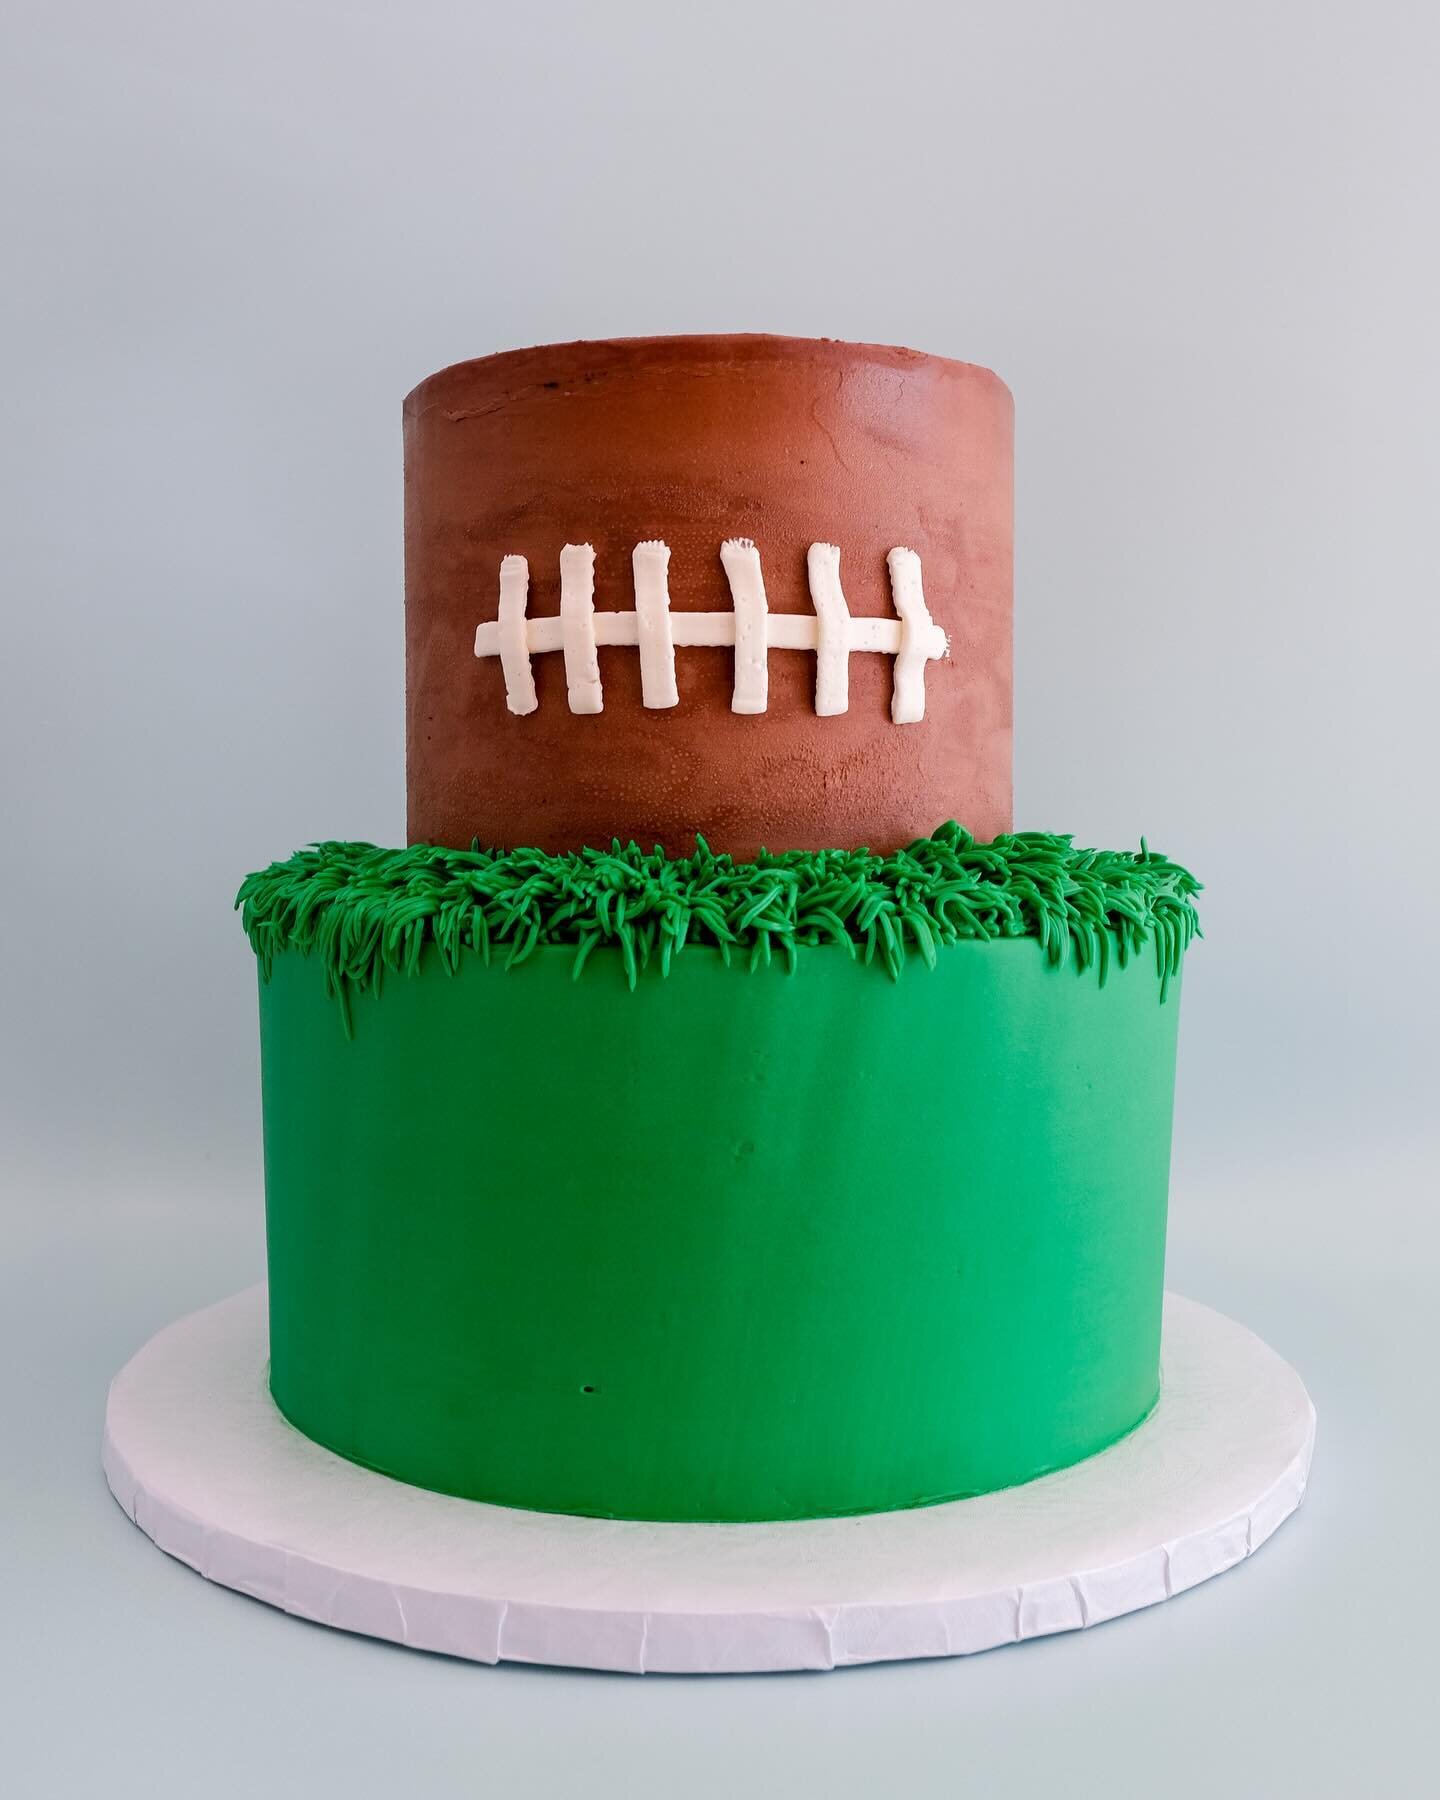 Go Football! Go Taylor! ❤️🏈

So much fun creating with @padocabakery 

📸 @erinelizabethbranding